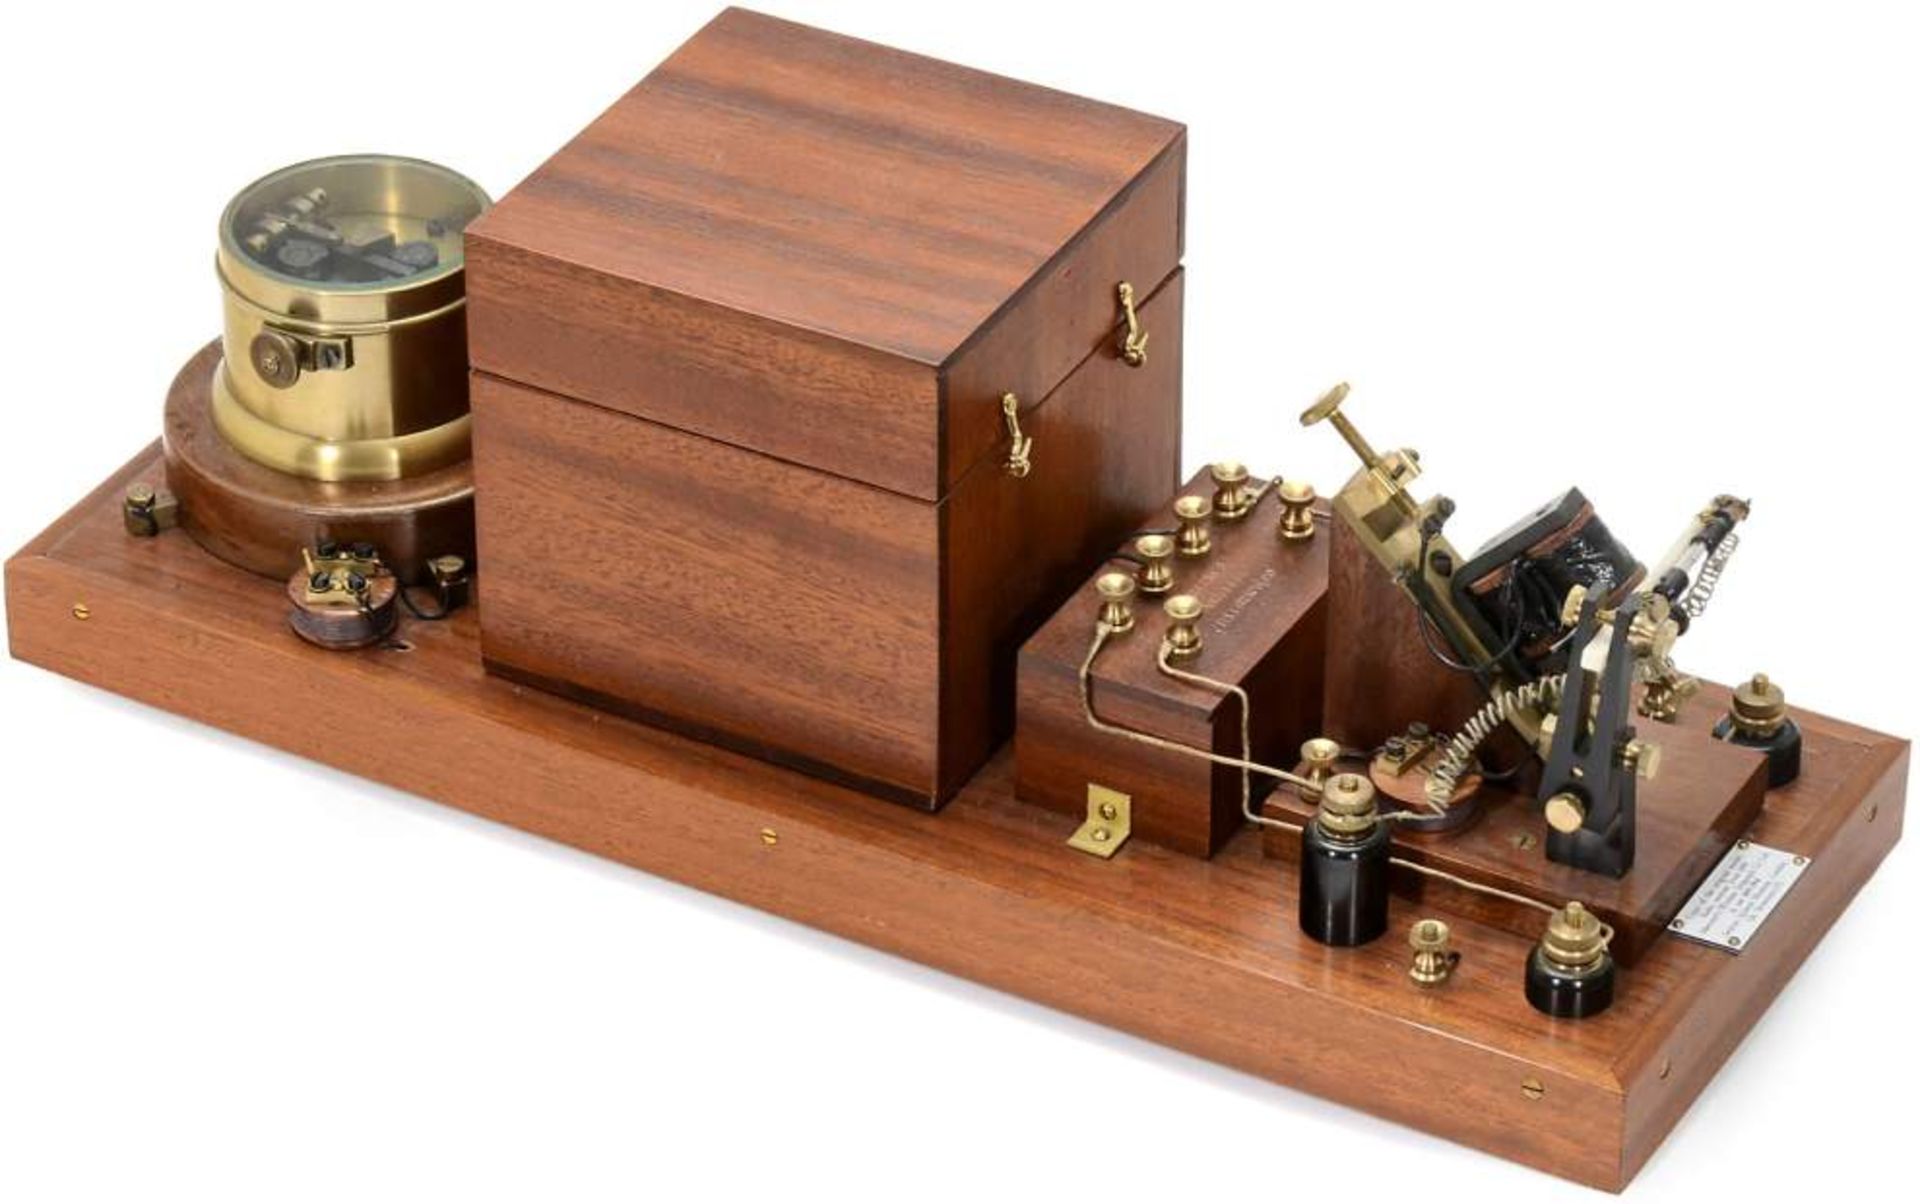 Marconi's Coherer Receiver
Exact copy based on the receiver in the Science Museum, London.